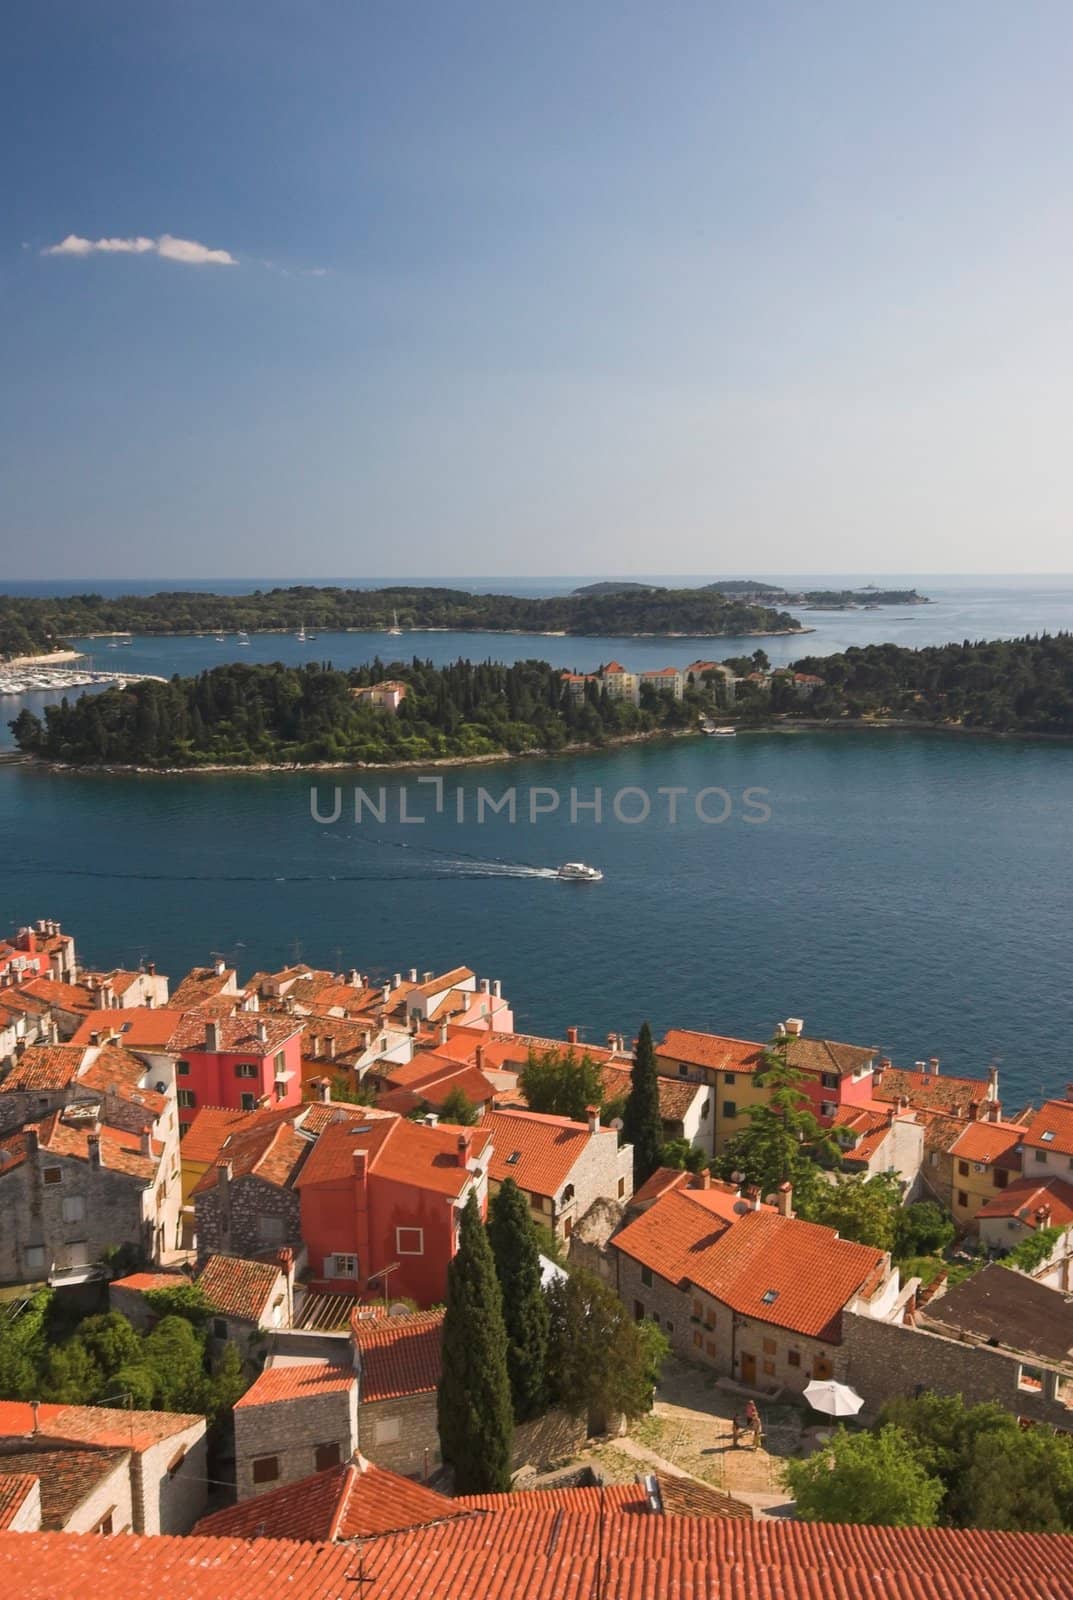 A view of Rovinj, Croatia, from the inside of the church tower